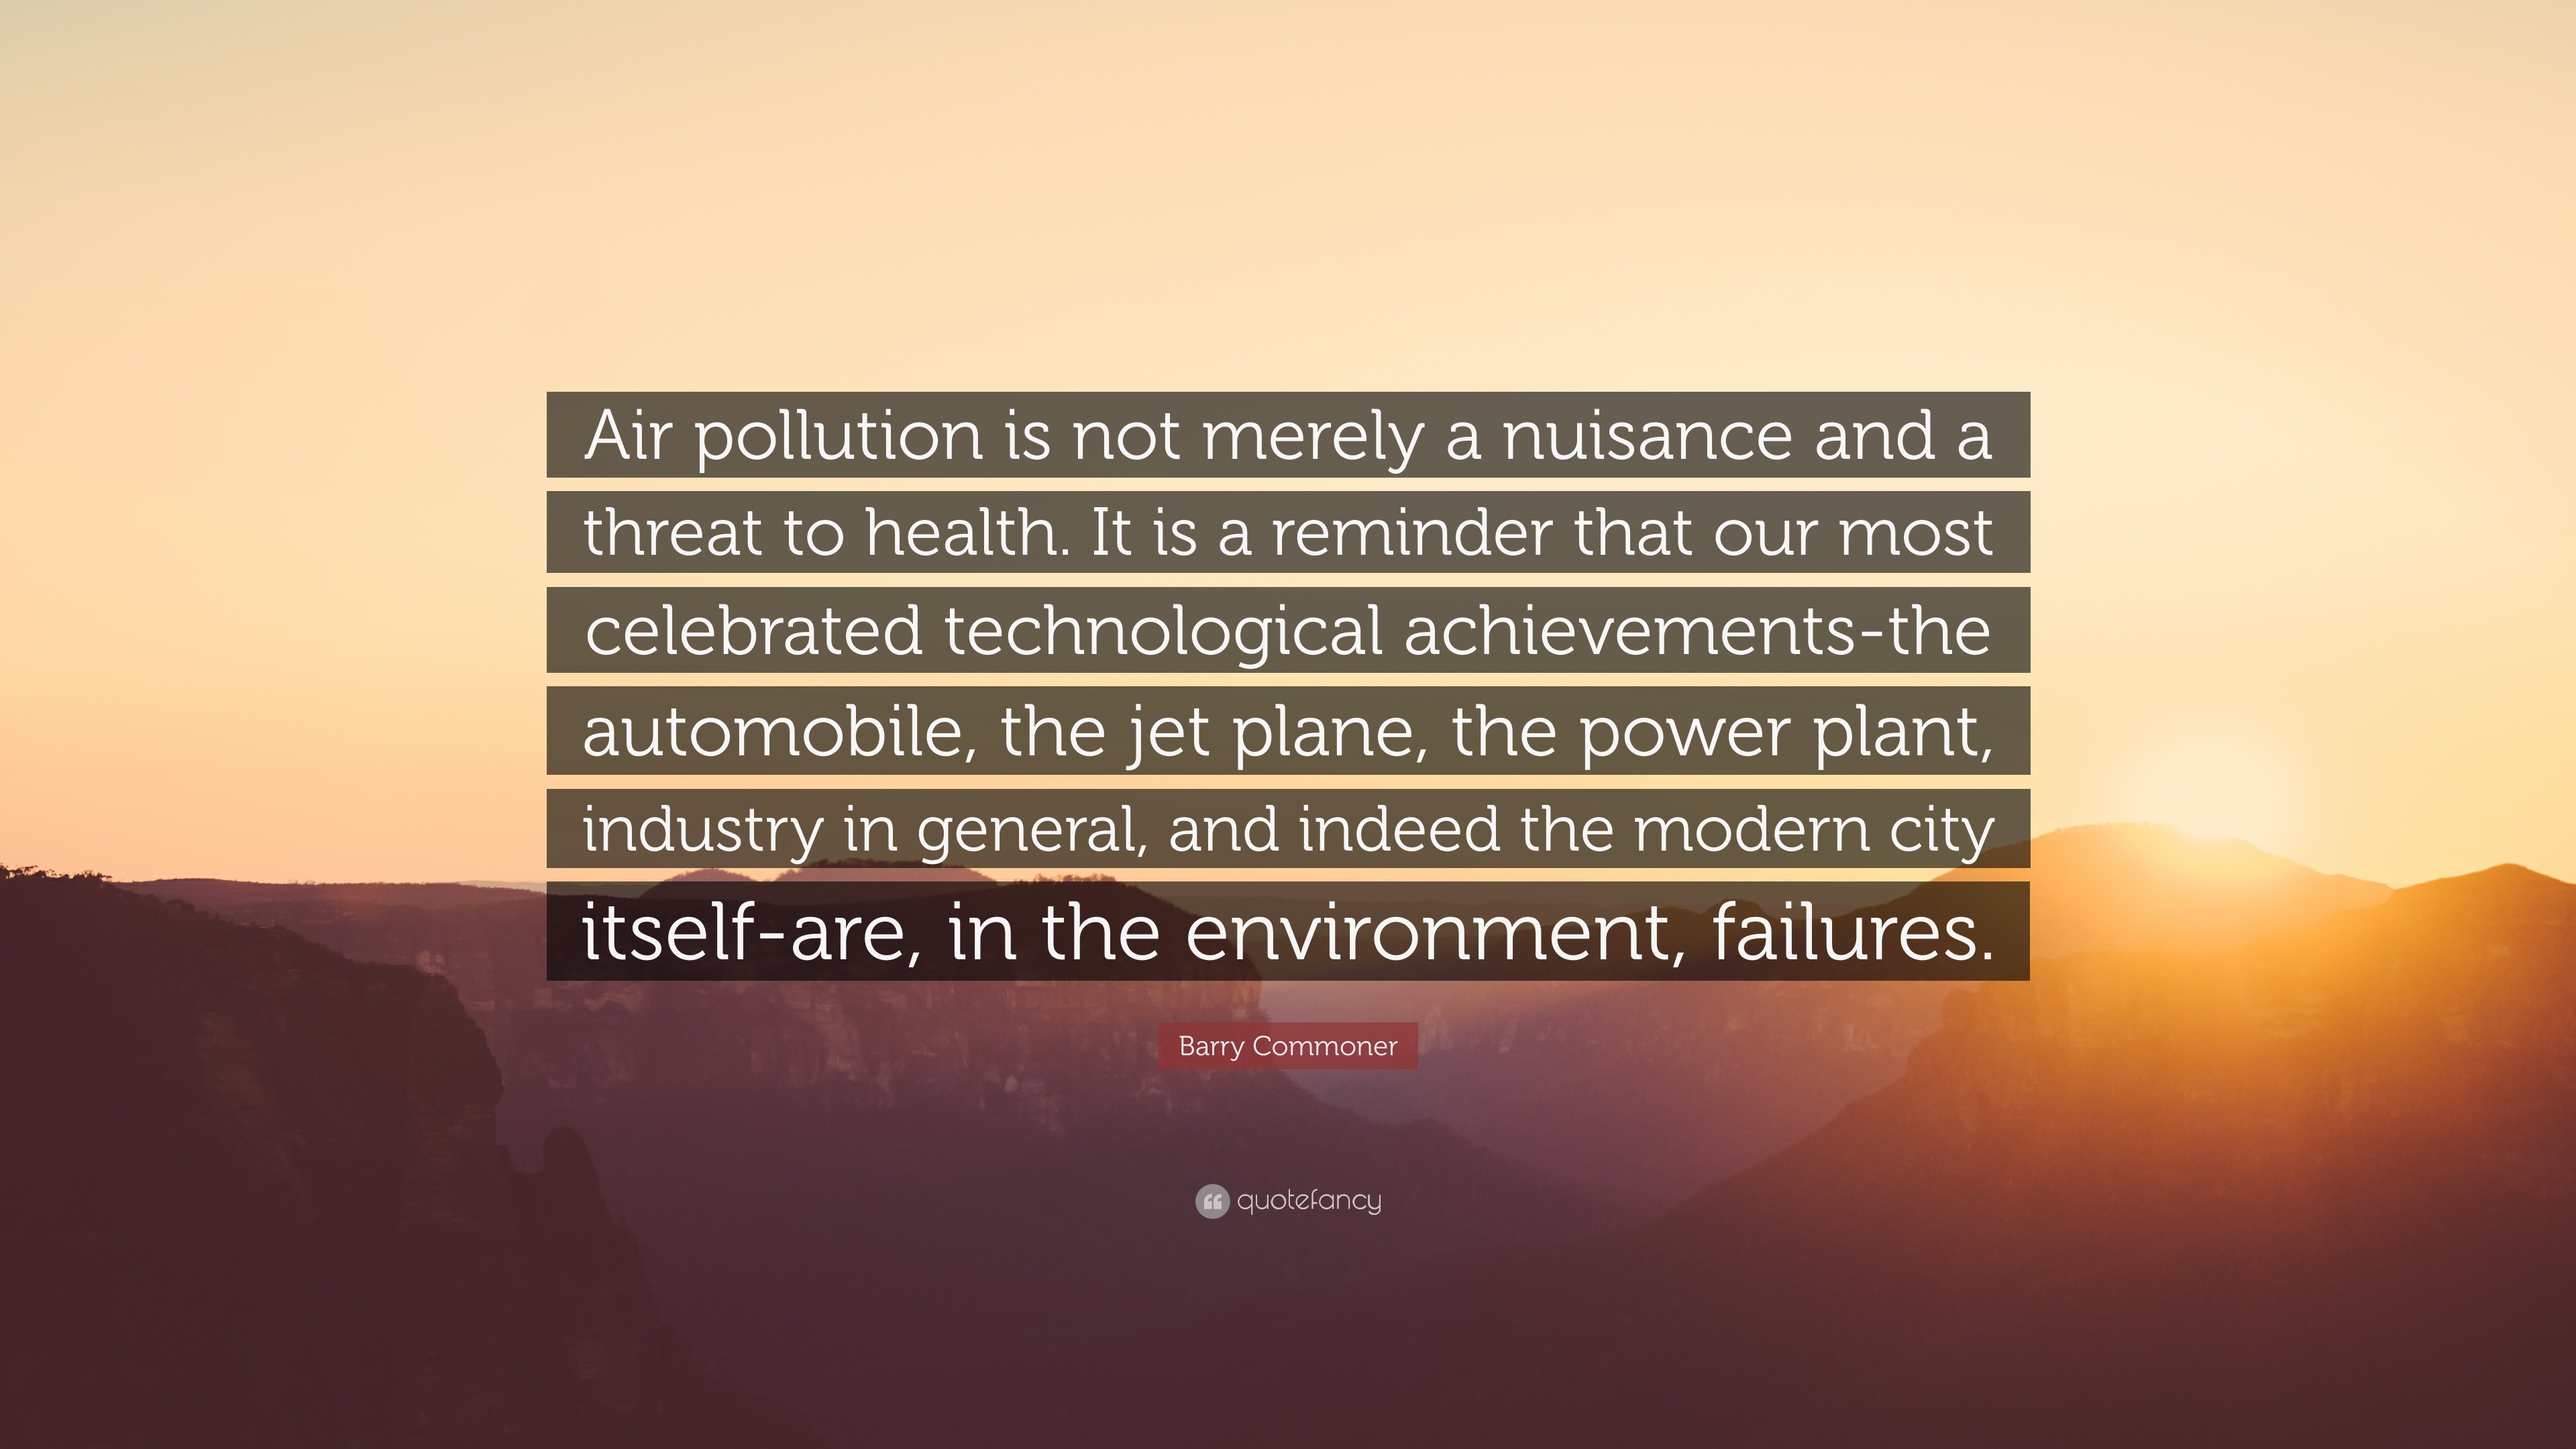 Barry Commoner Quote: “Air pollution is not merely a nuisance and a